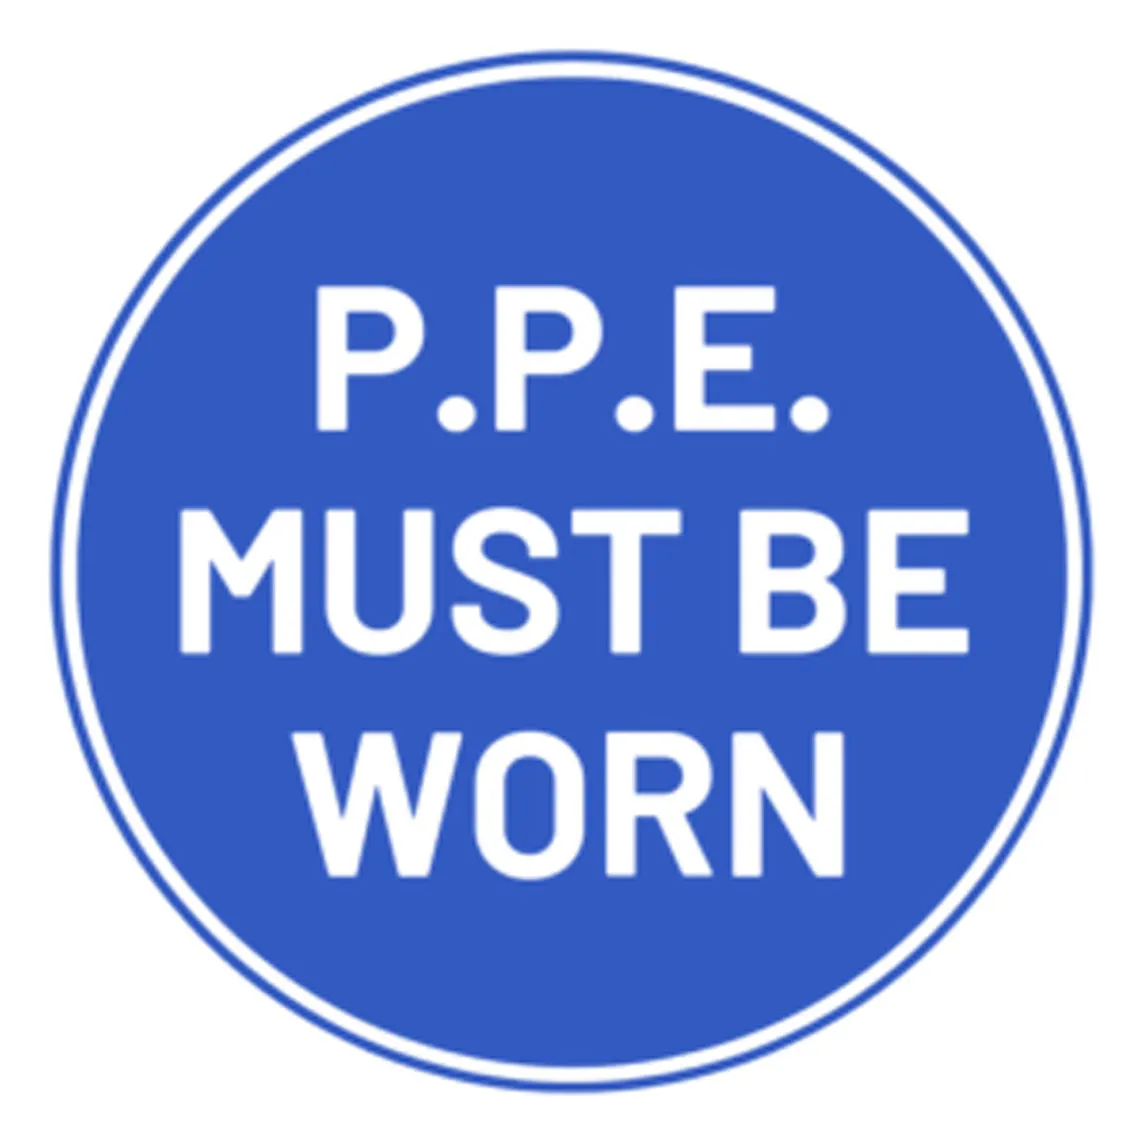 sign to warn employees of chemical risks: "personal protective equipment must be worn"